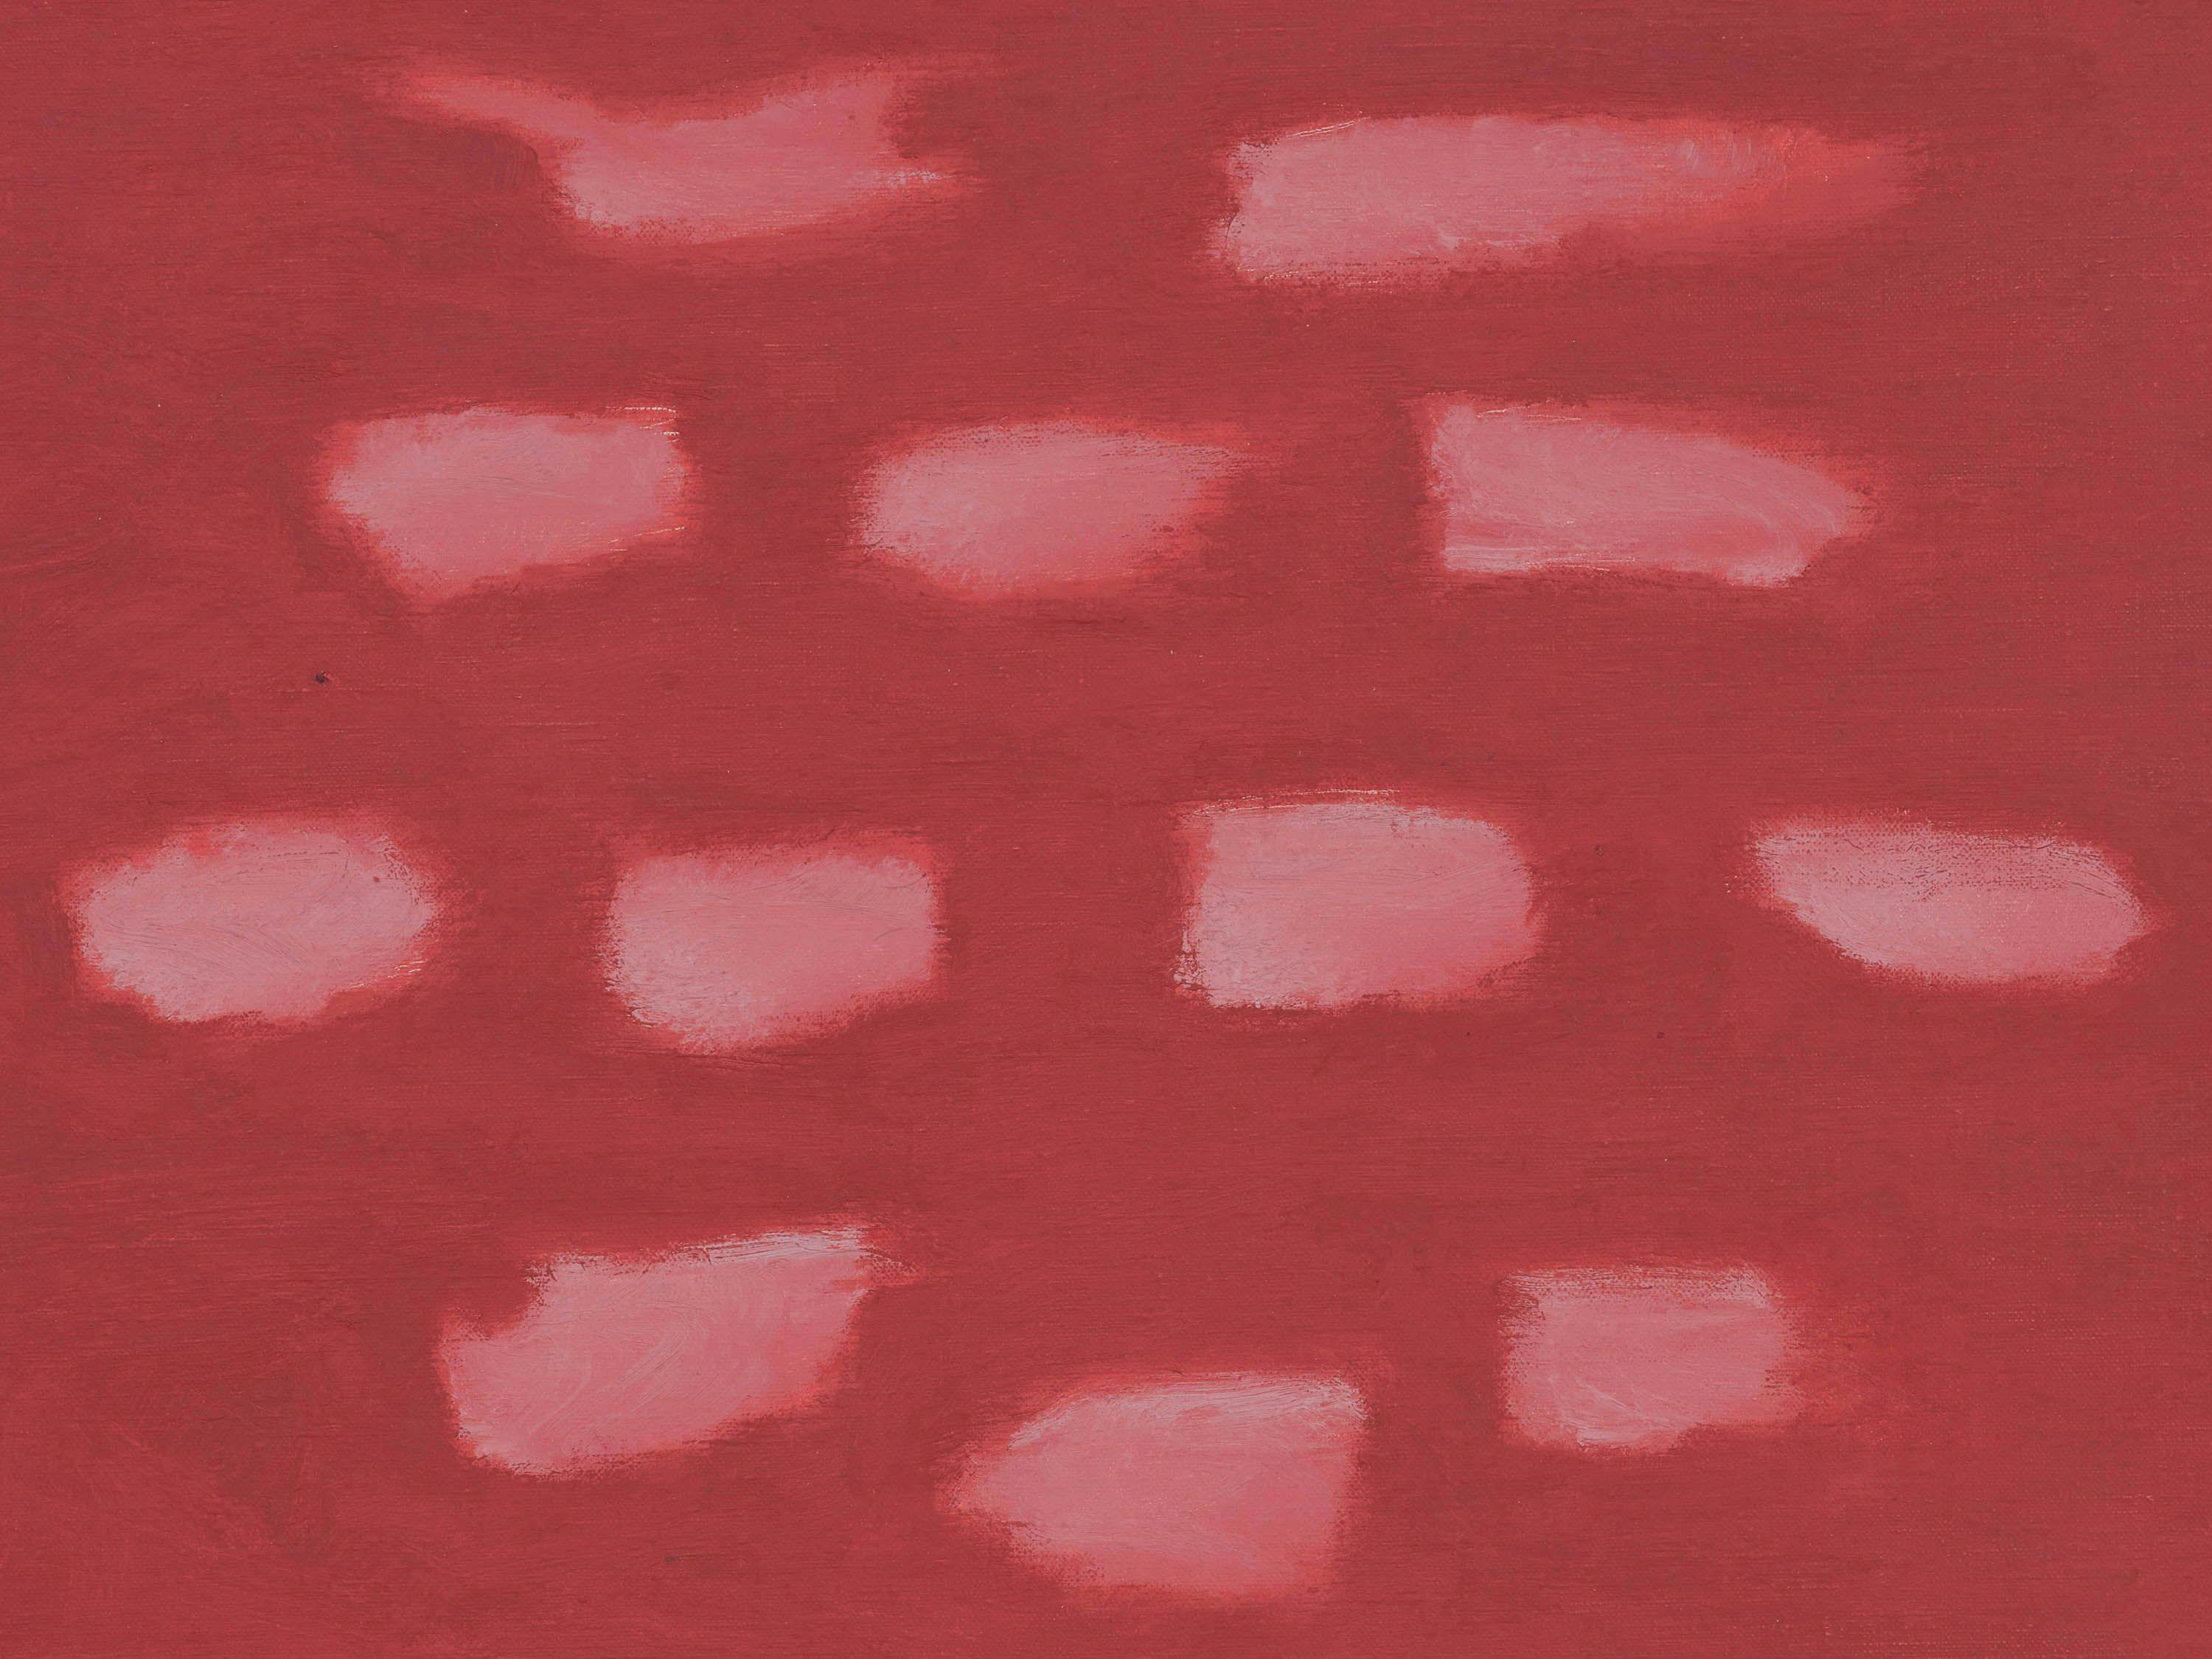 A detail from a painting by Raoul De Keyser, called Untitled (Blurs), dated 1995.